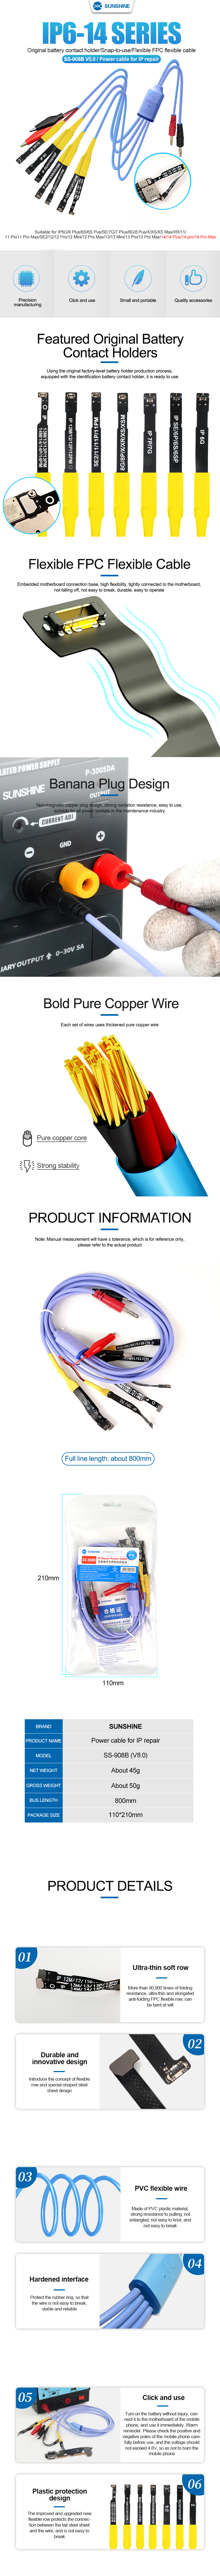 SUNSHINE SS-908B IP repair special power cable / V8.0 version SUNSHINE SS-908B IP repair special power cable / V8.0 version